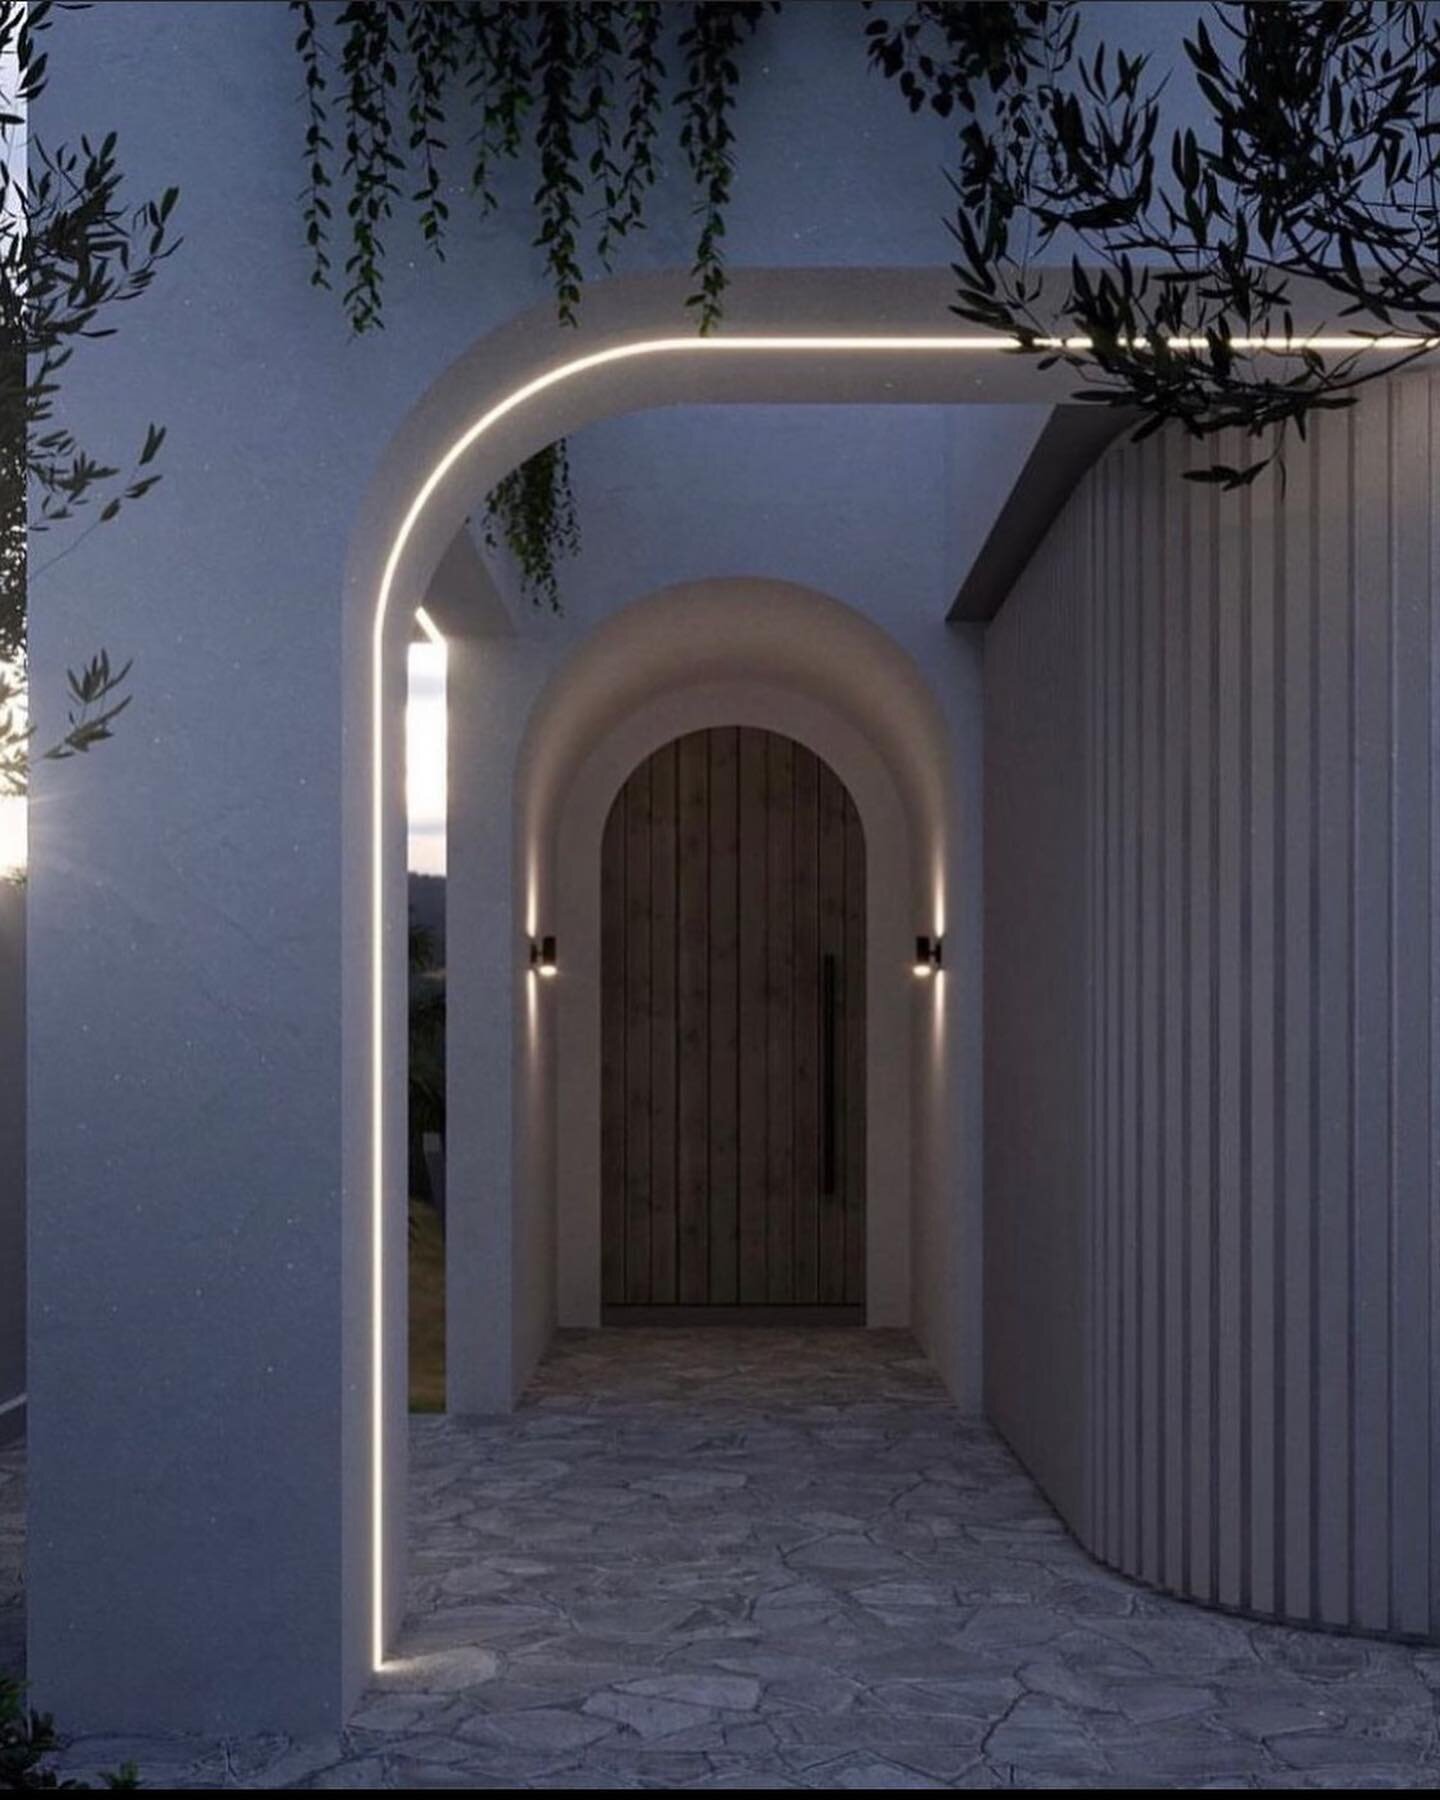 Render vs reality. Tackling this task of a beautiful arched entry with stunning feature lighting had its challenges but the results speak for themselves. Stay tuned as the end of this project nears, it&rsquo;s is simply incredible what the team @bats